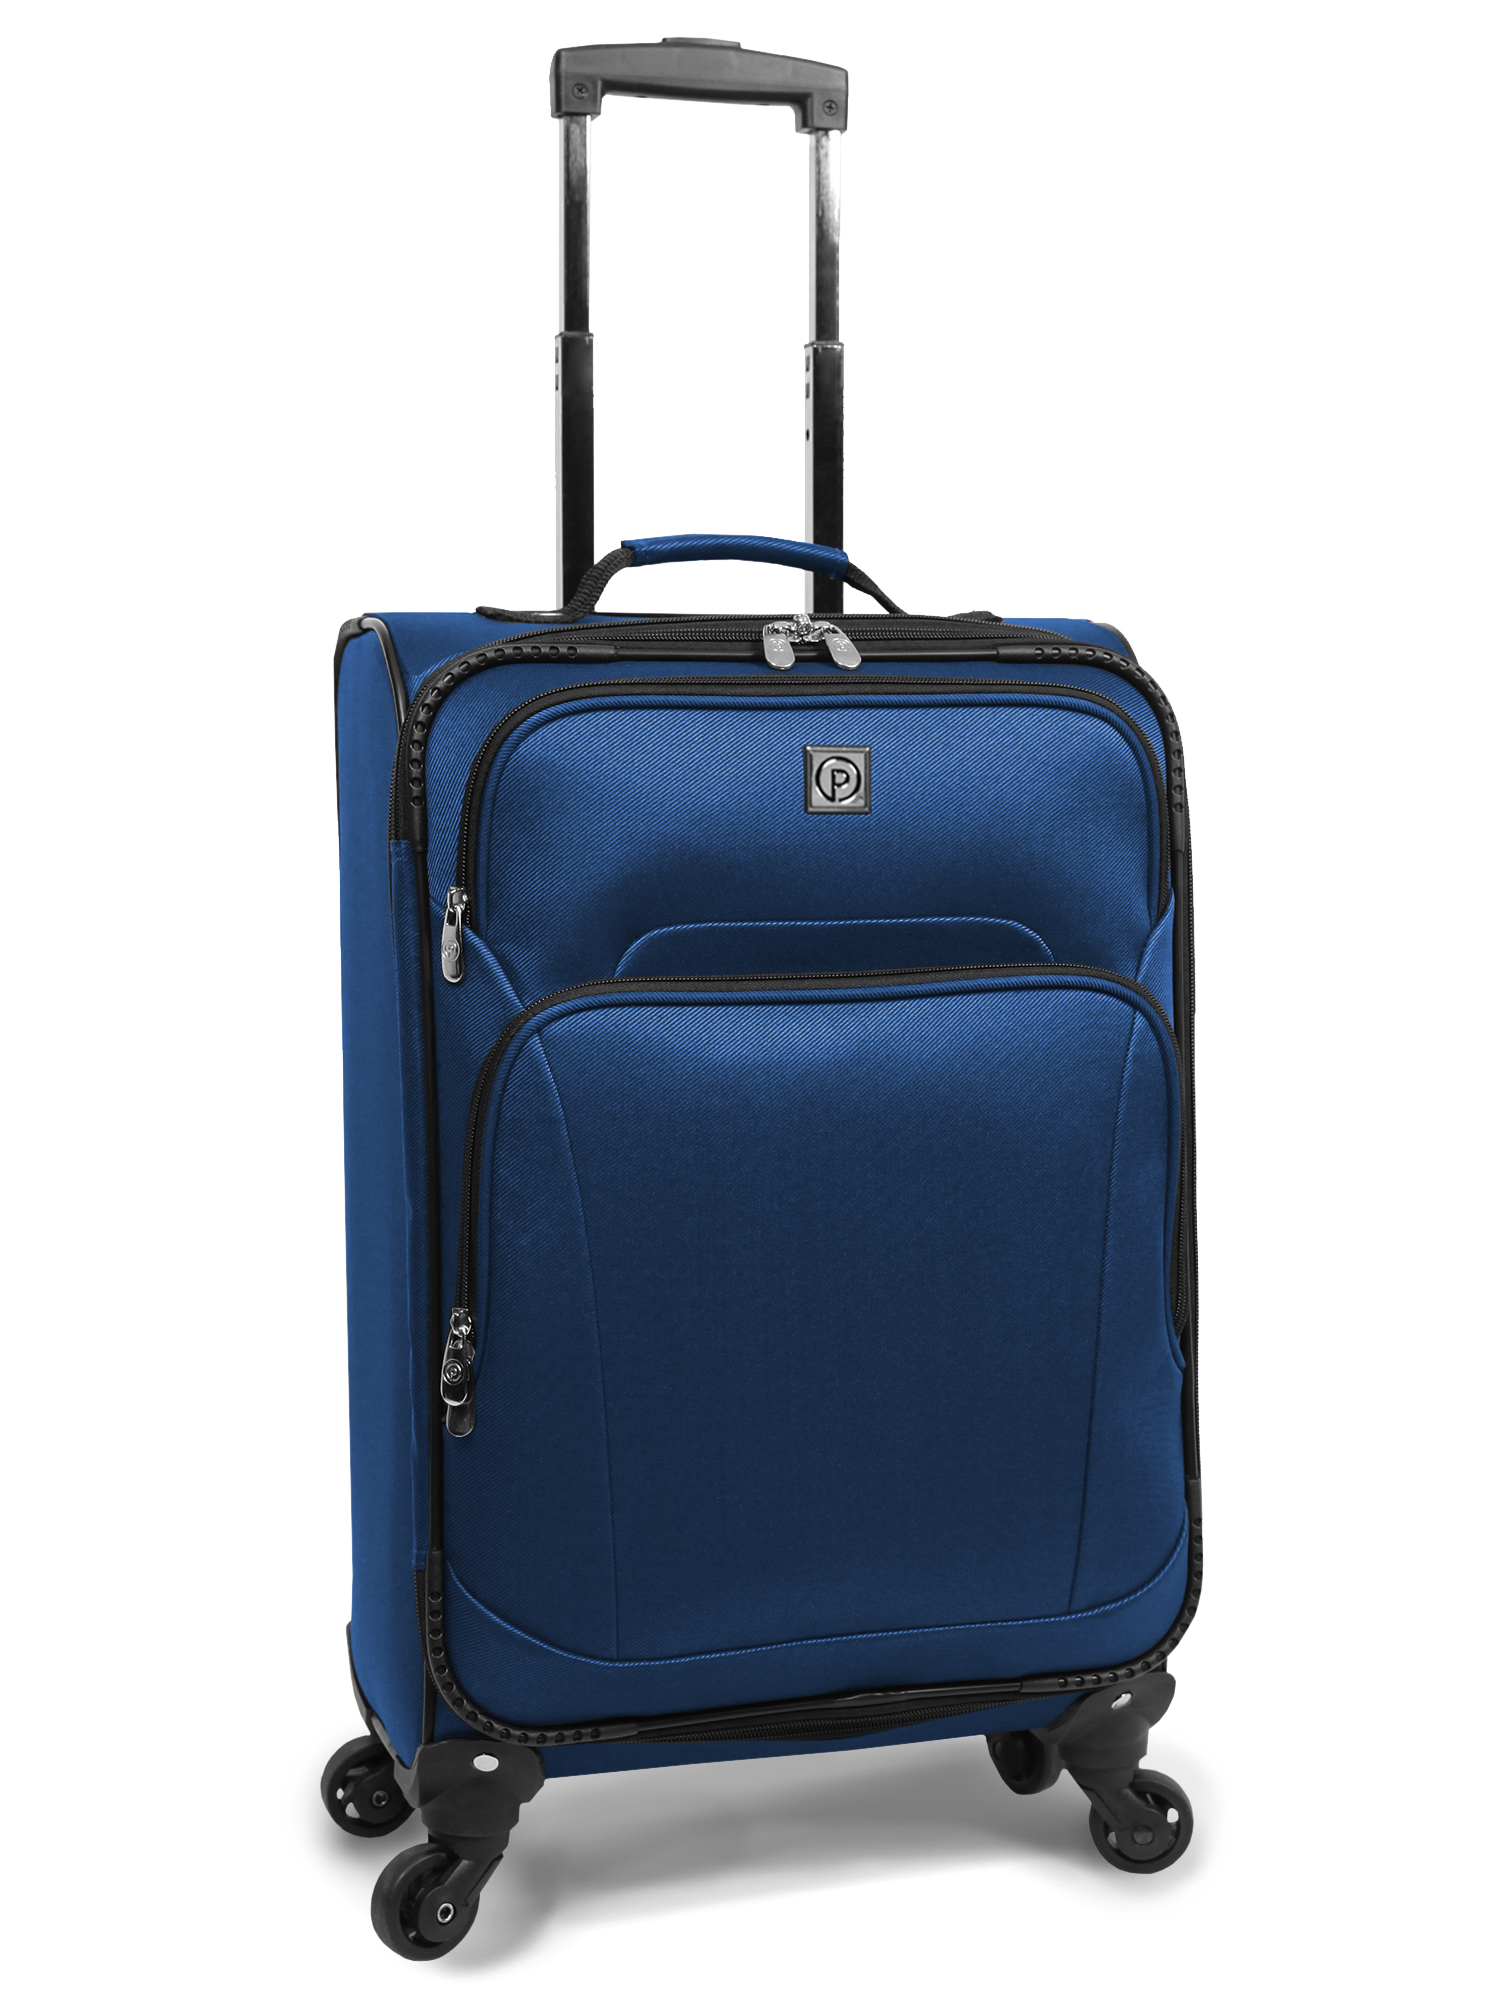 Protege 5 Piece Luggage Set w/ Carry on and Checked Bag, Blue (Online Only) - image 2 of 12